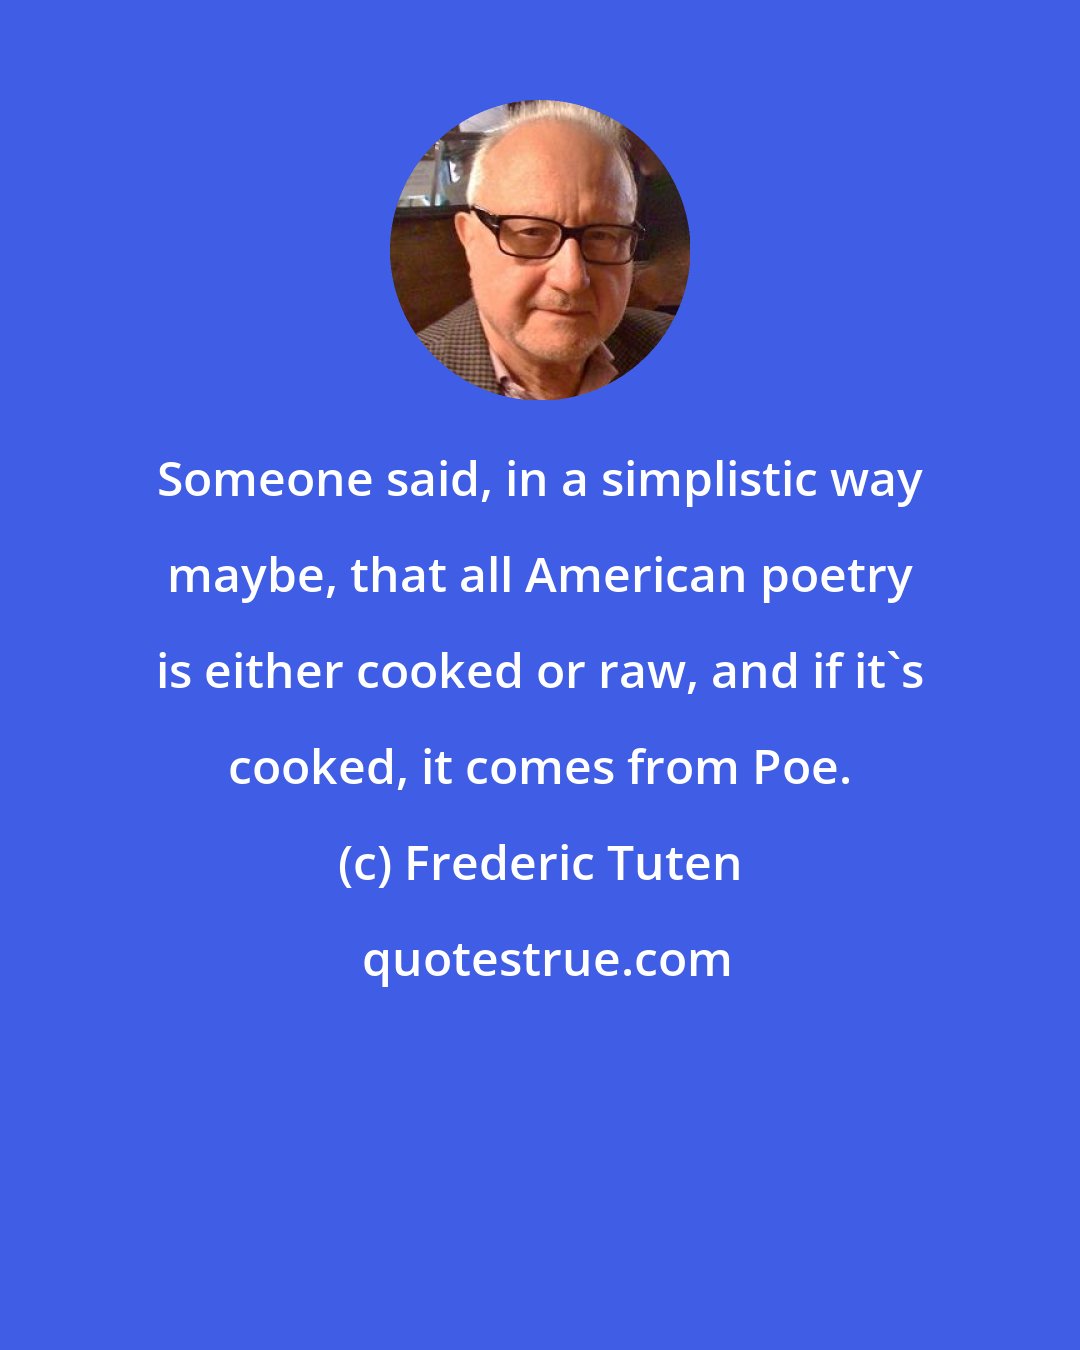 Frederic Tuten: Someone said, in a simplistic way maybe, that all American poetry is either cooked or raw, and if it's cooked, it comes from Poe.